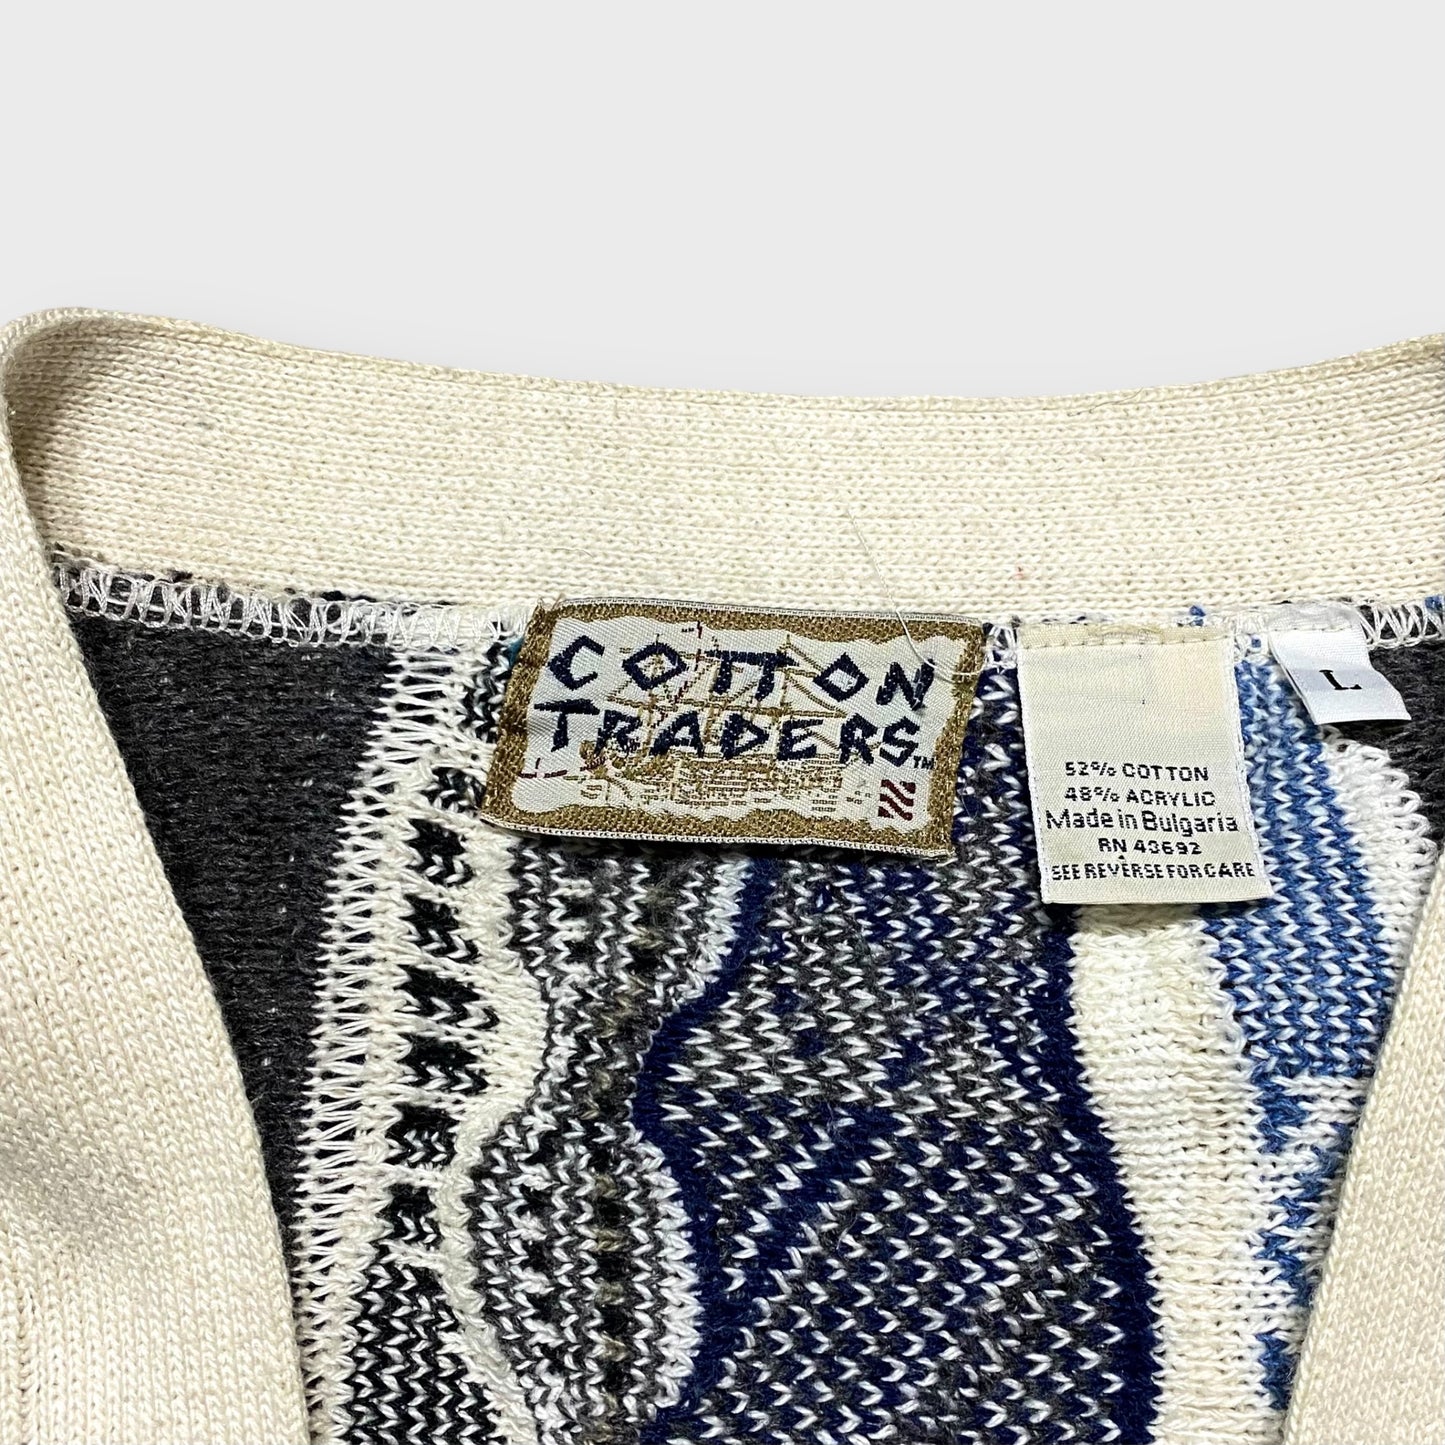 90's "COTTON TRADERS" 3D knit cardigan